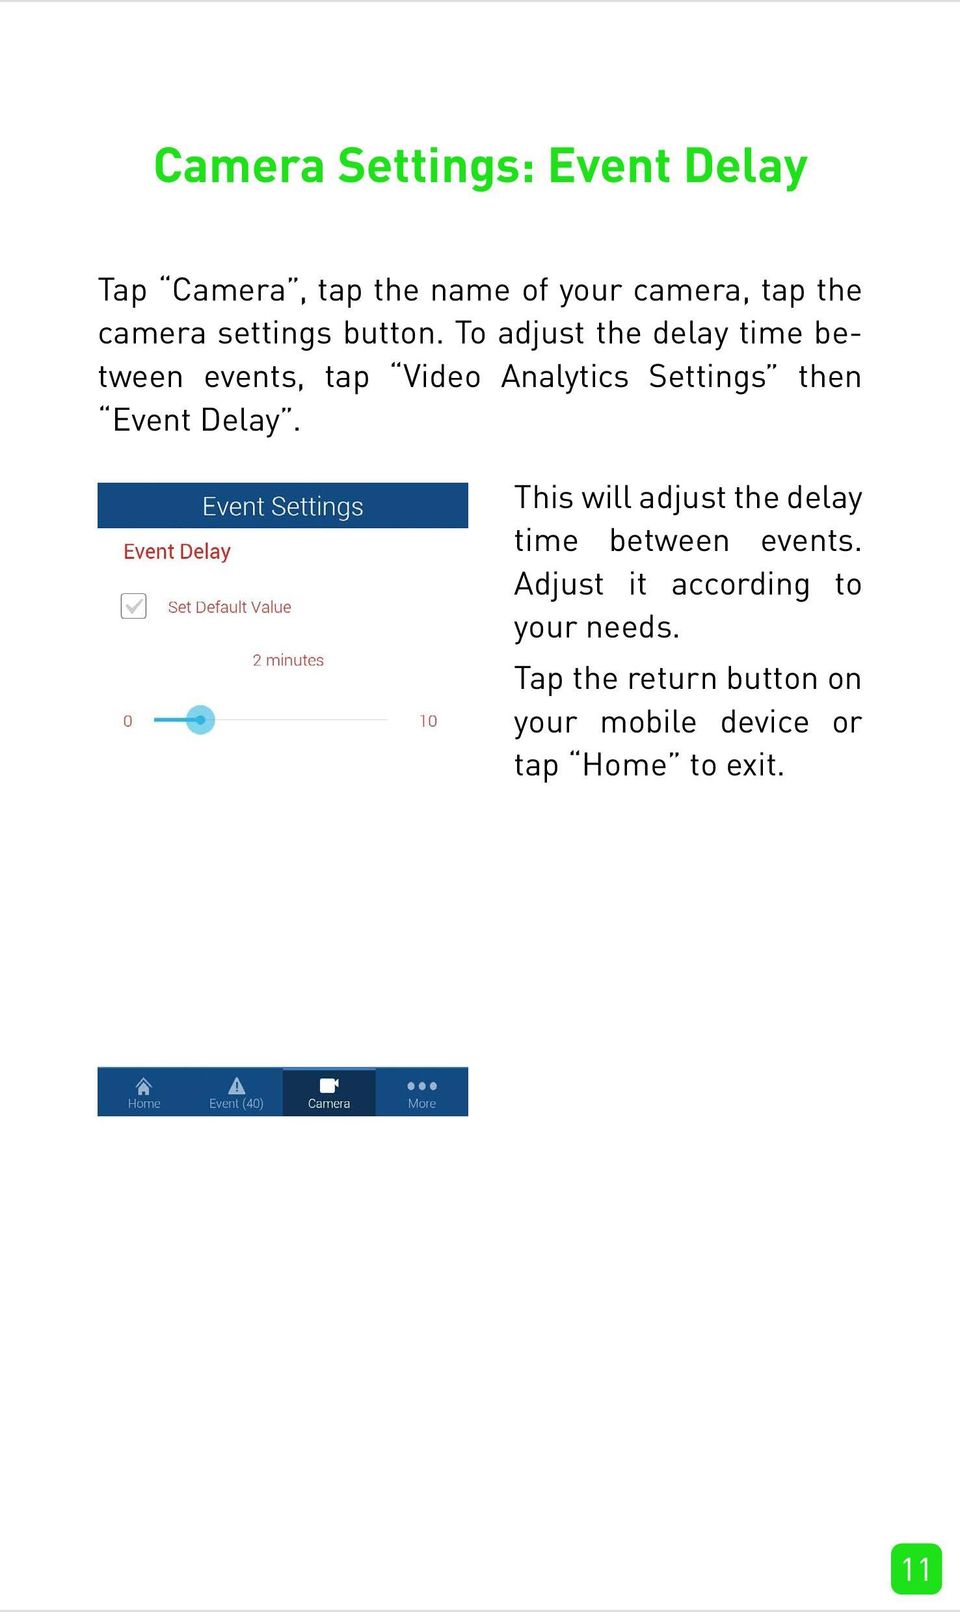 To adjust the delay time between events, tap Video Analytics Settings then Event